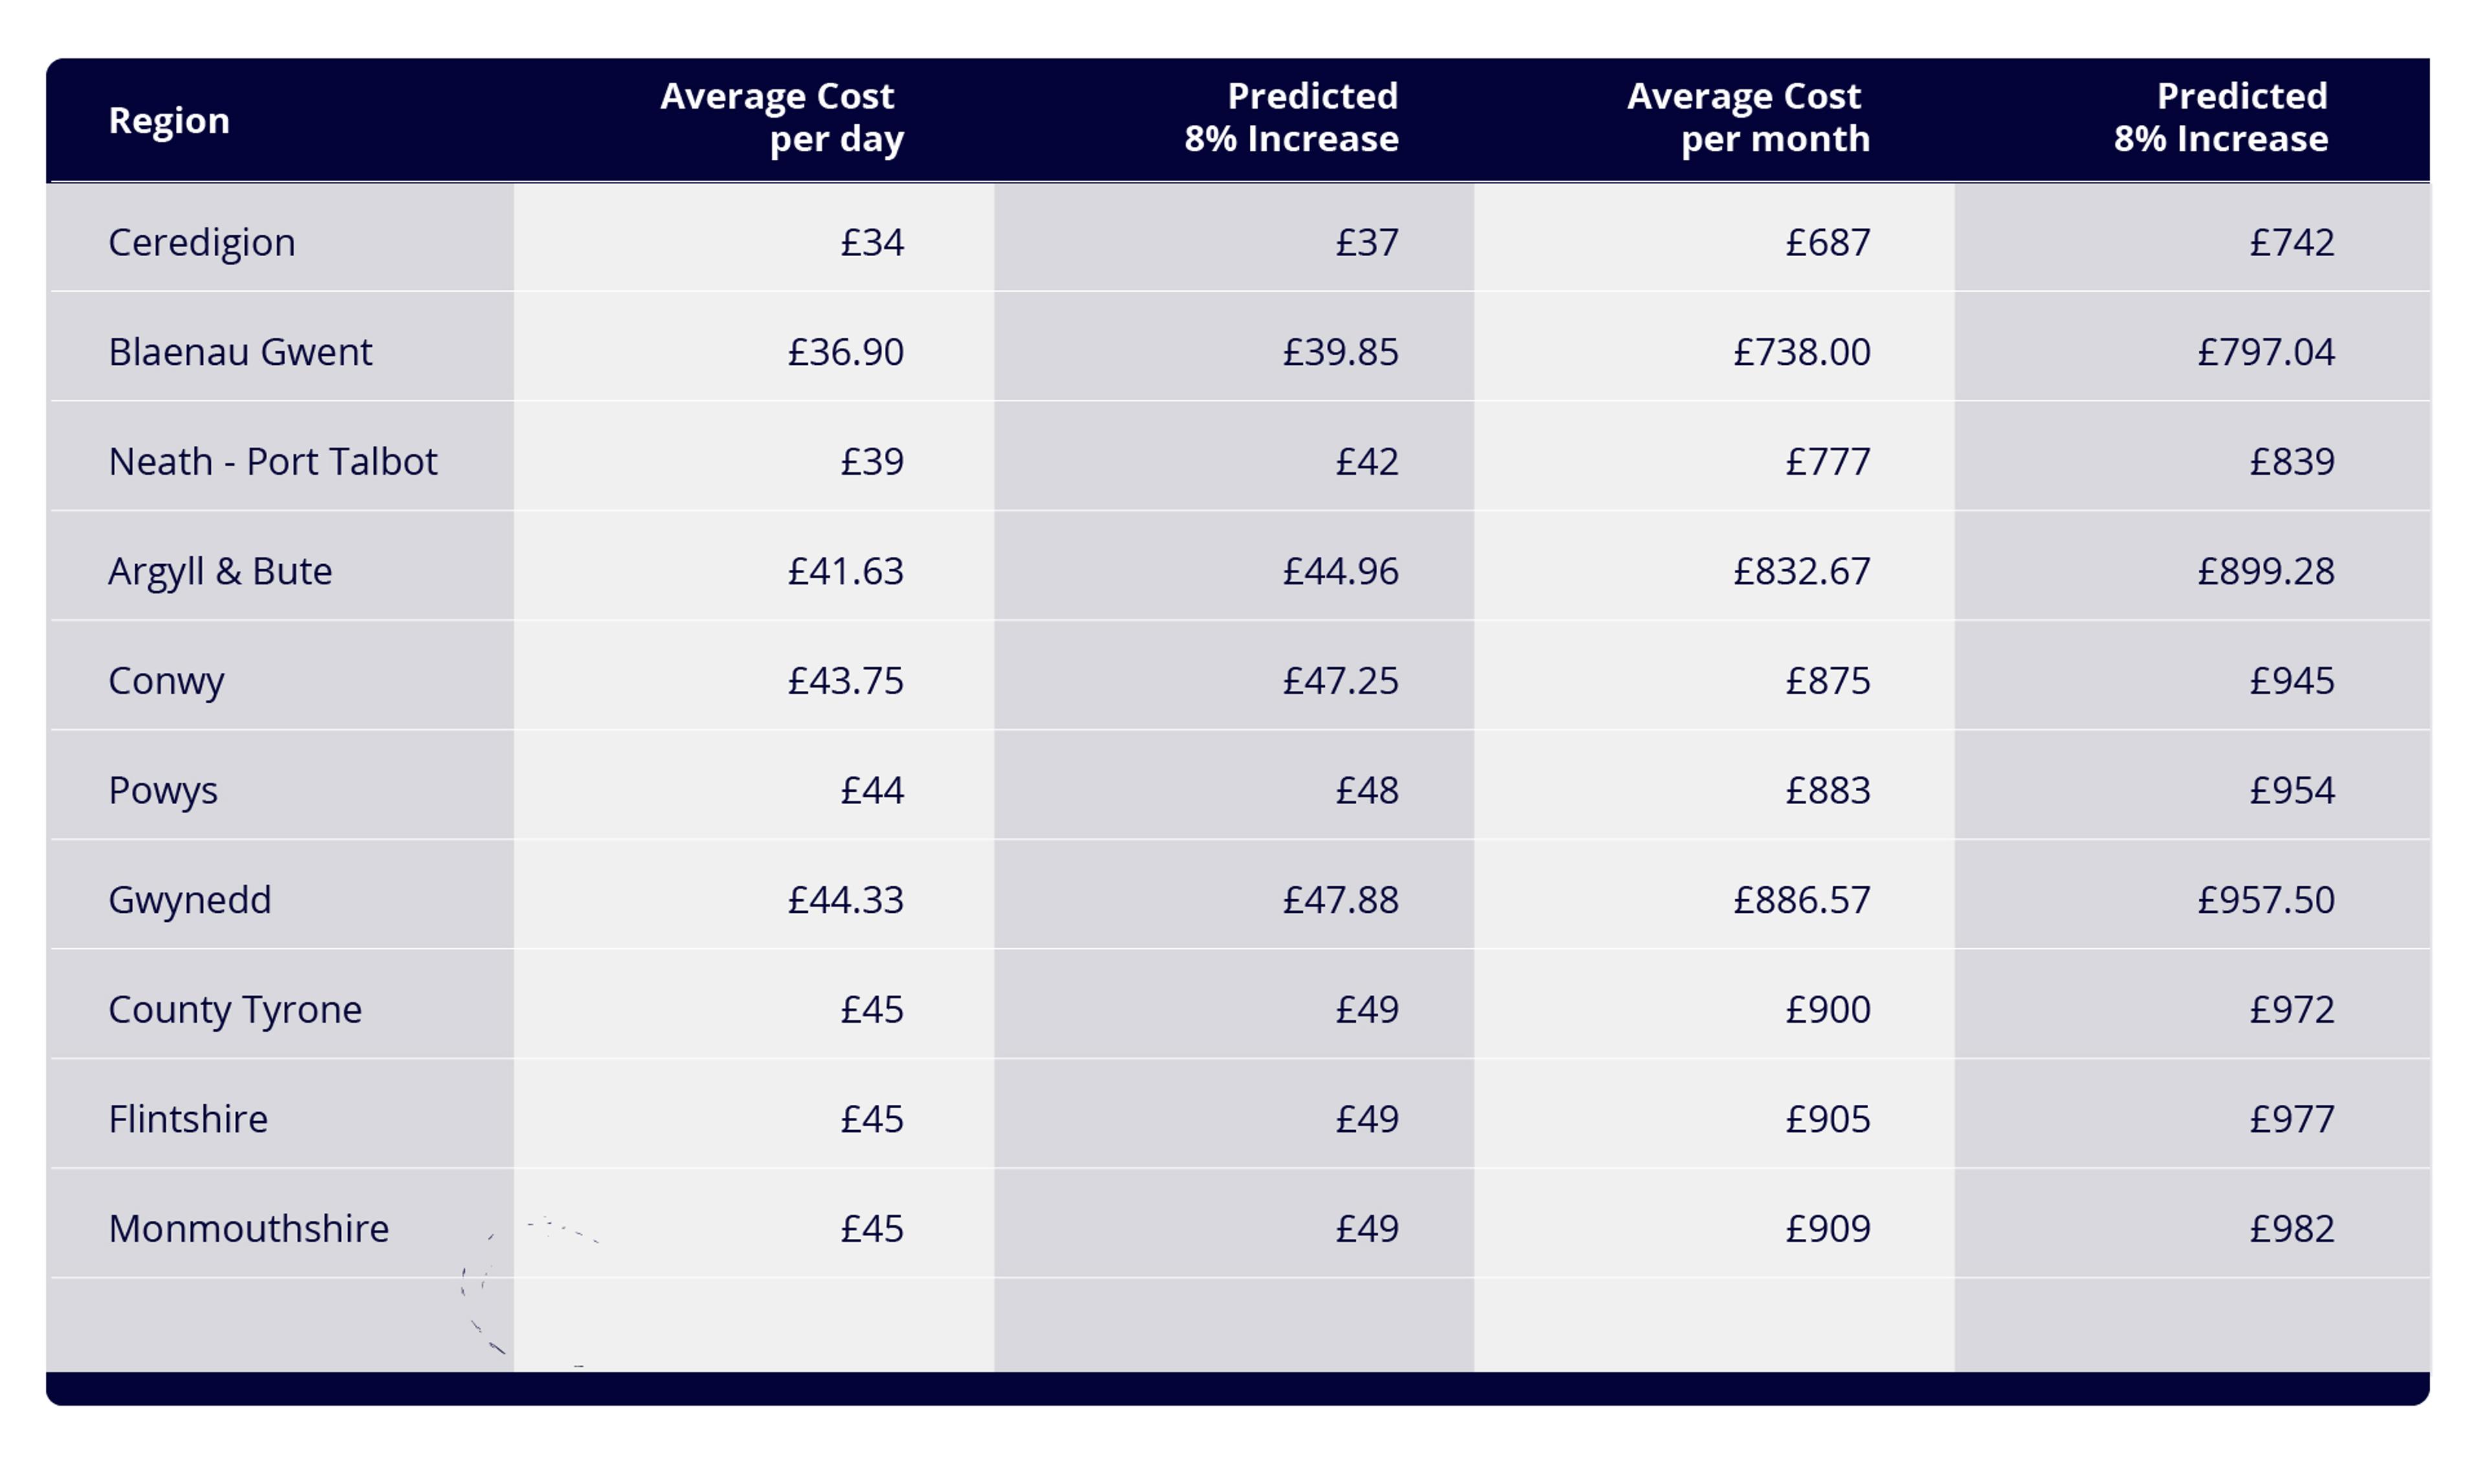 A table showing the Top 10 Least Expensive Childcare Regions